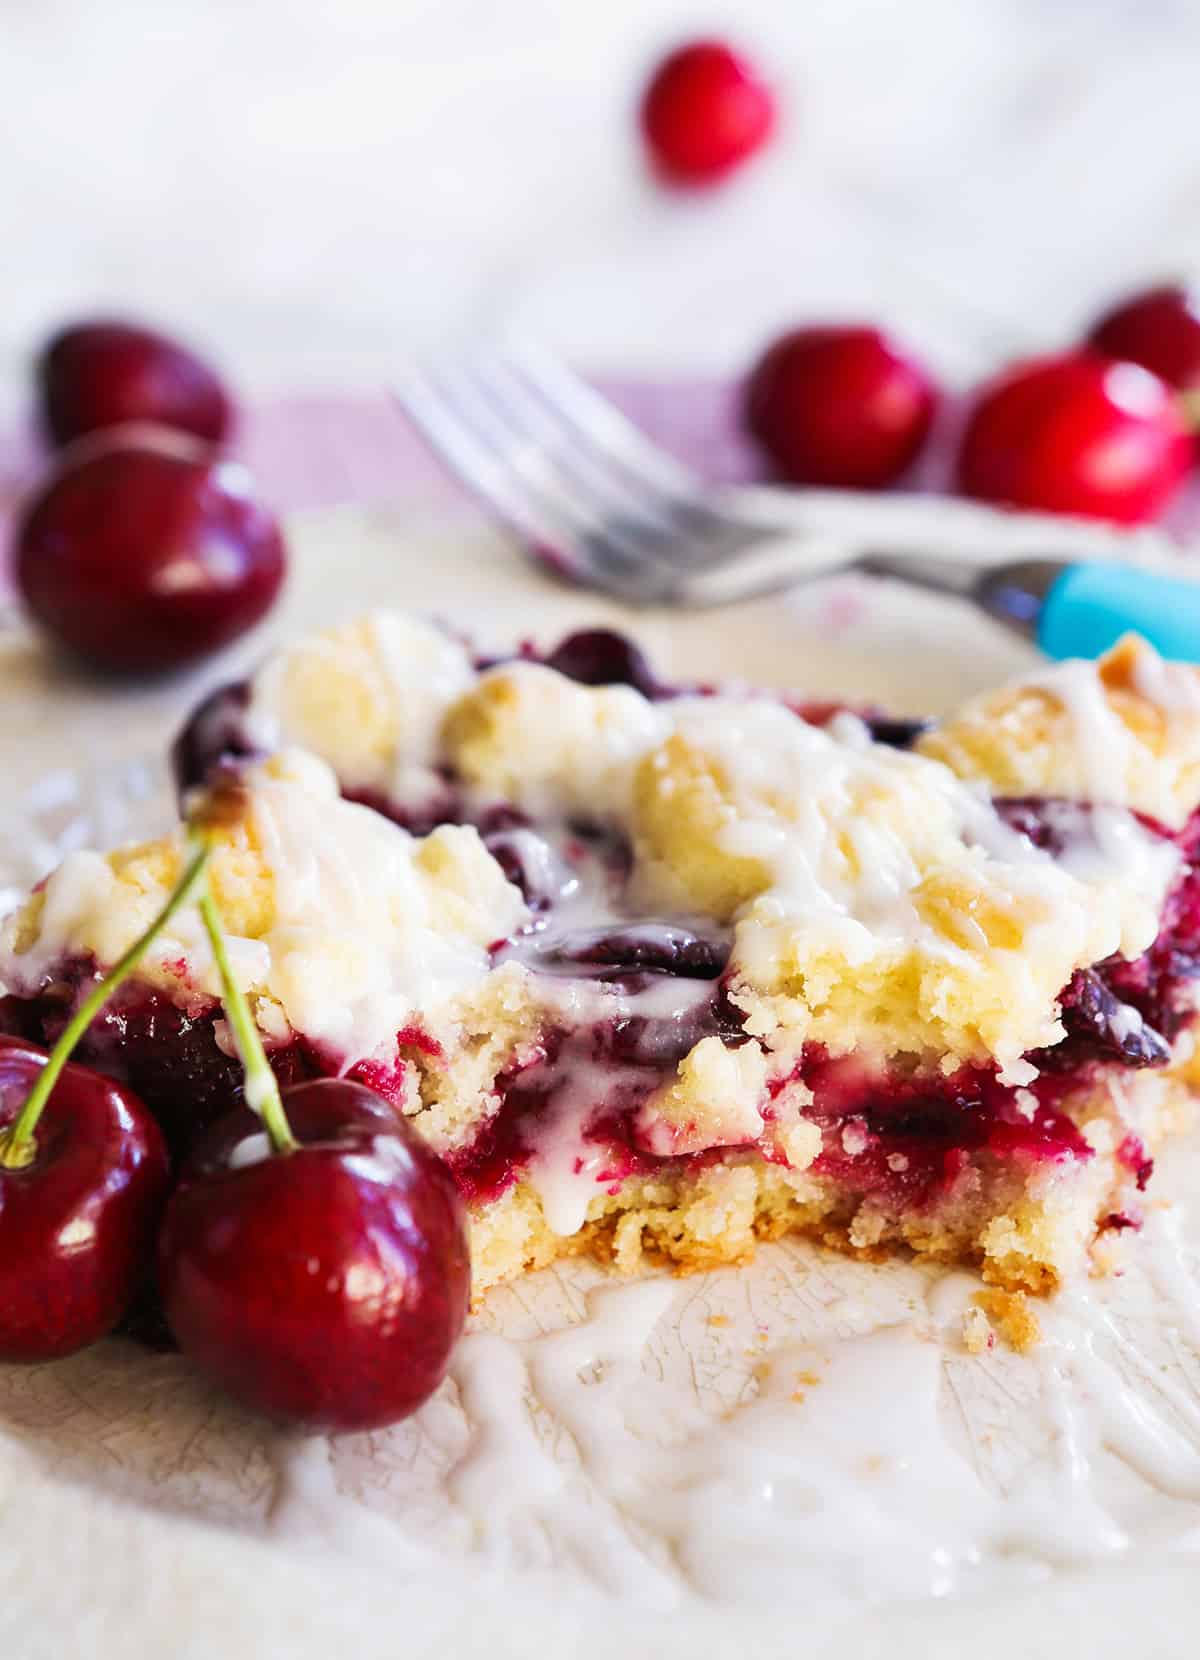 A piece of cherry bars with a bite taken out on a plate surrounded by cherries.